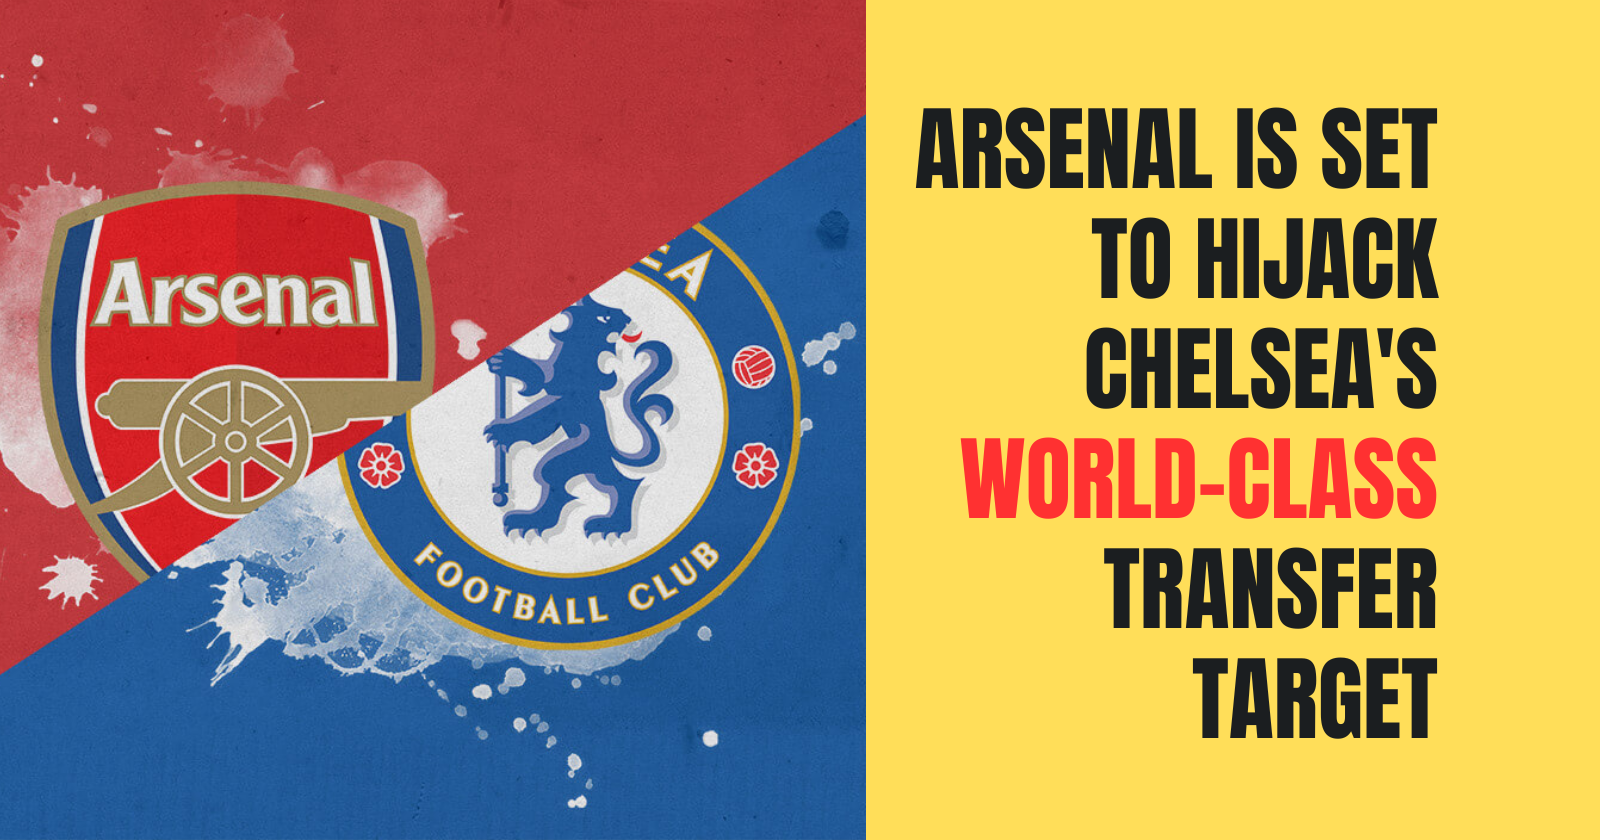 Arsenal Is Set To Hijack Chelsea's World-Class Transfer Target